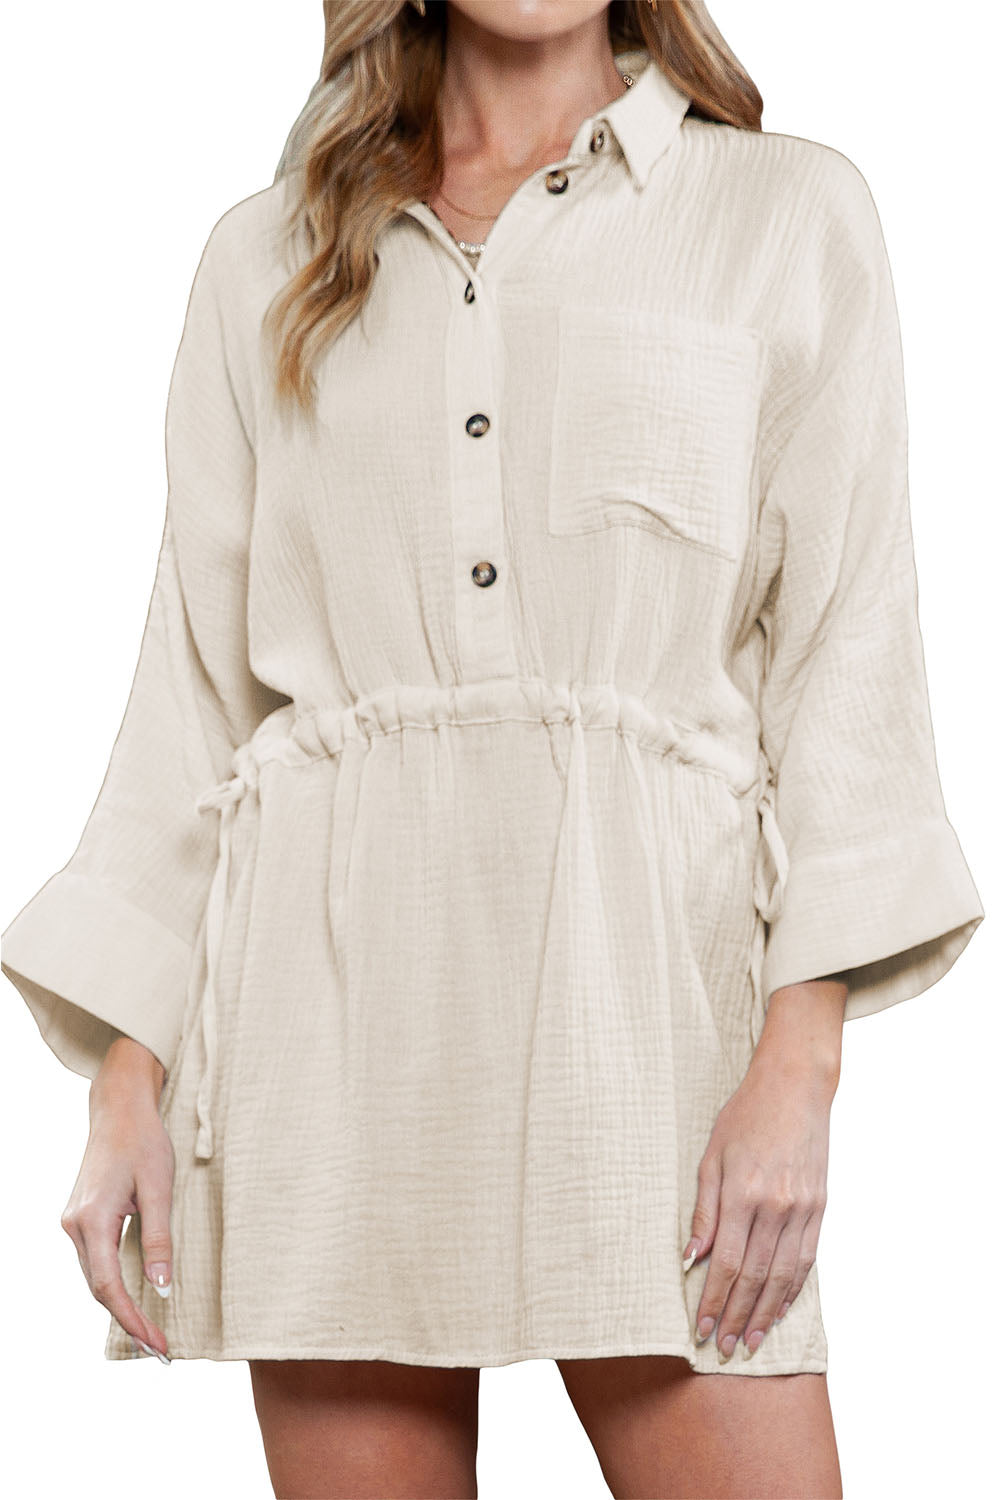 Beige Cotton Solid Color Buttoned Closure Long Sleeve Casual Dress